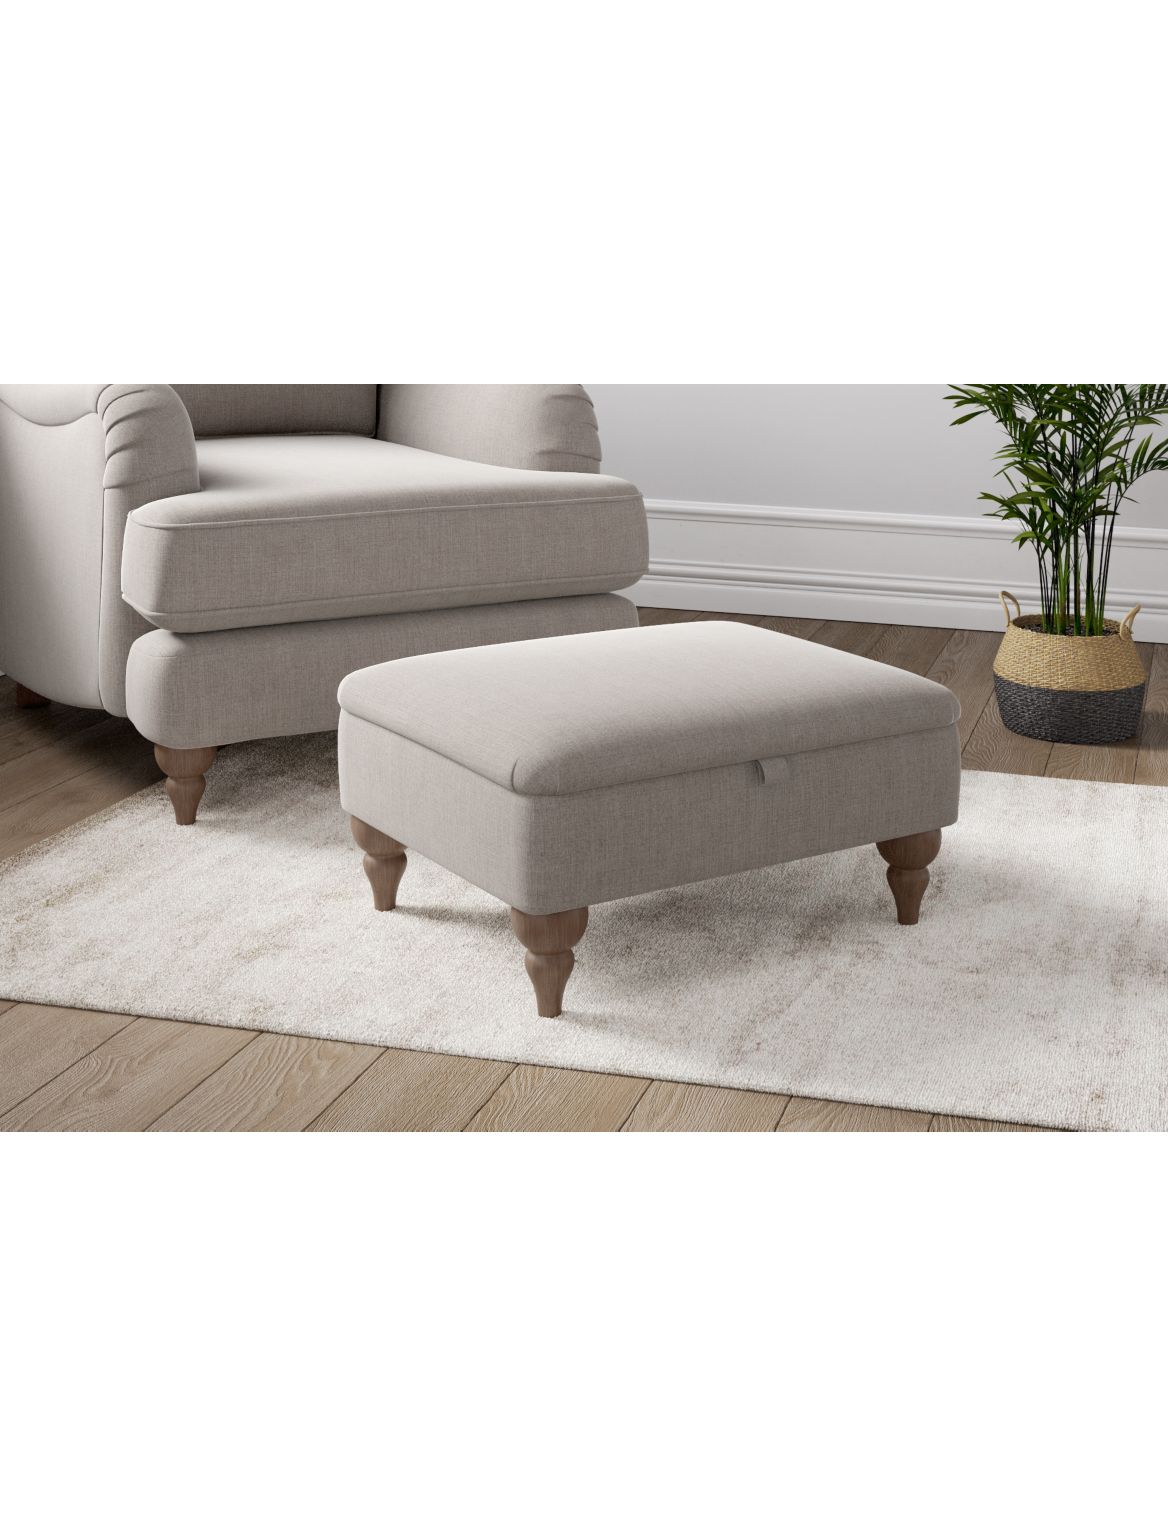 Rochester Footstool with Storage